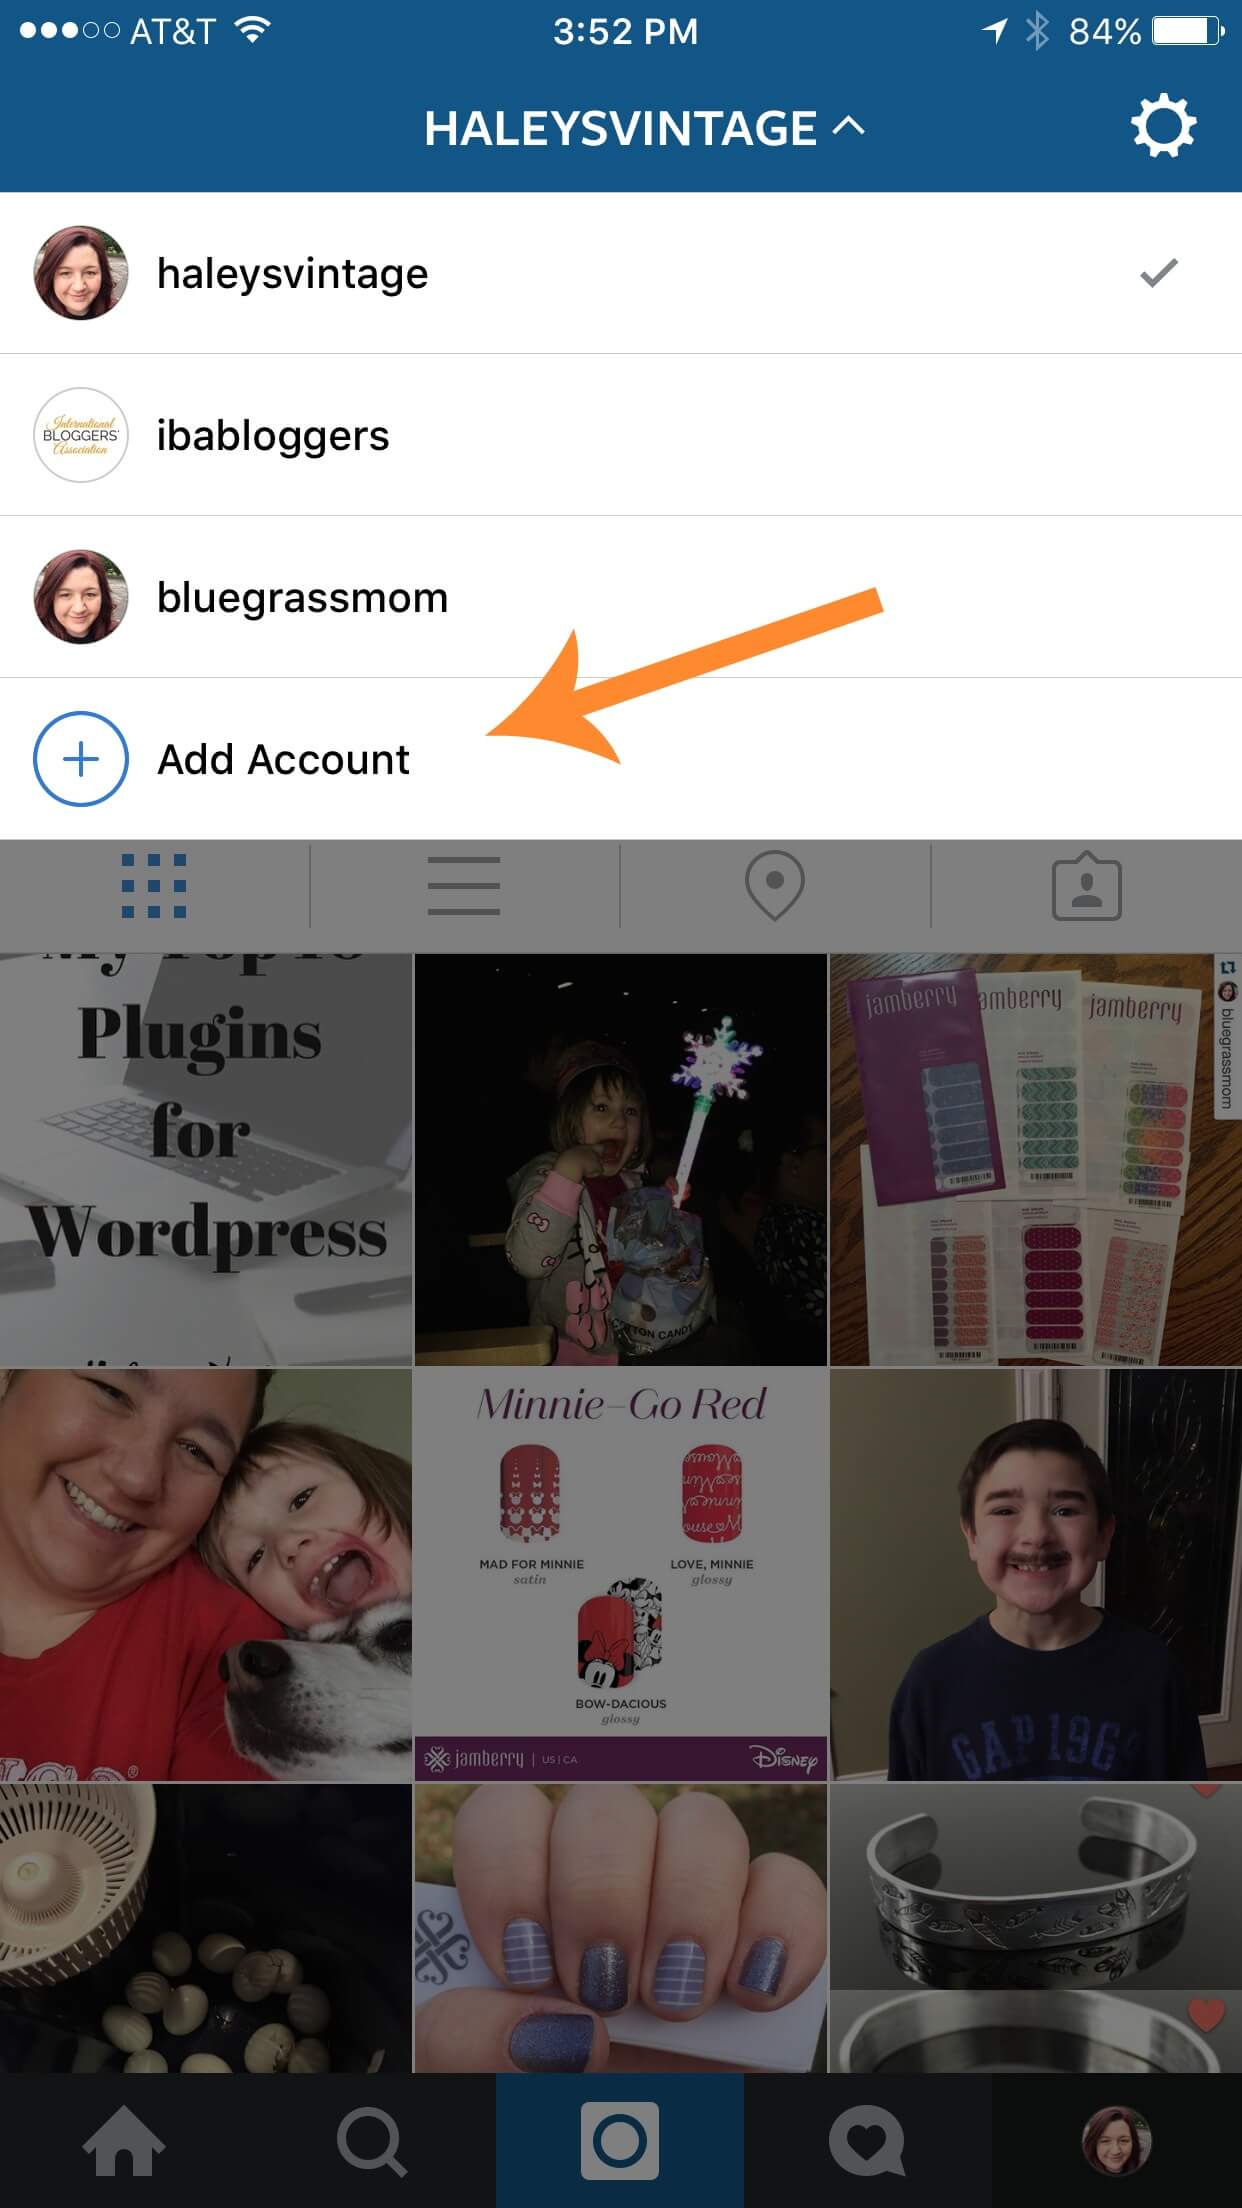 Instagram finally listened! Now you can easily toggle between multiple Instagram accounts! Quickly learn how to switch between 5 different user accounts.